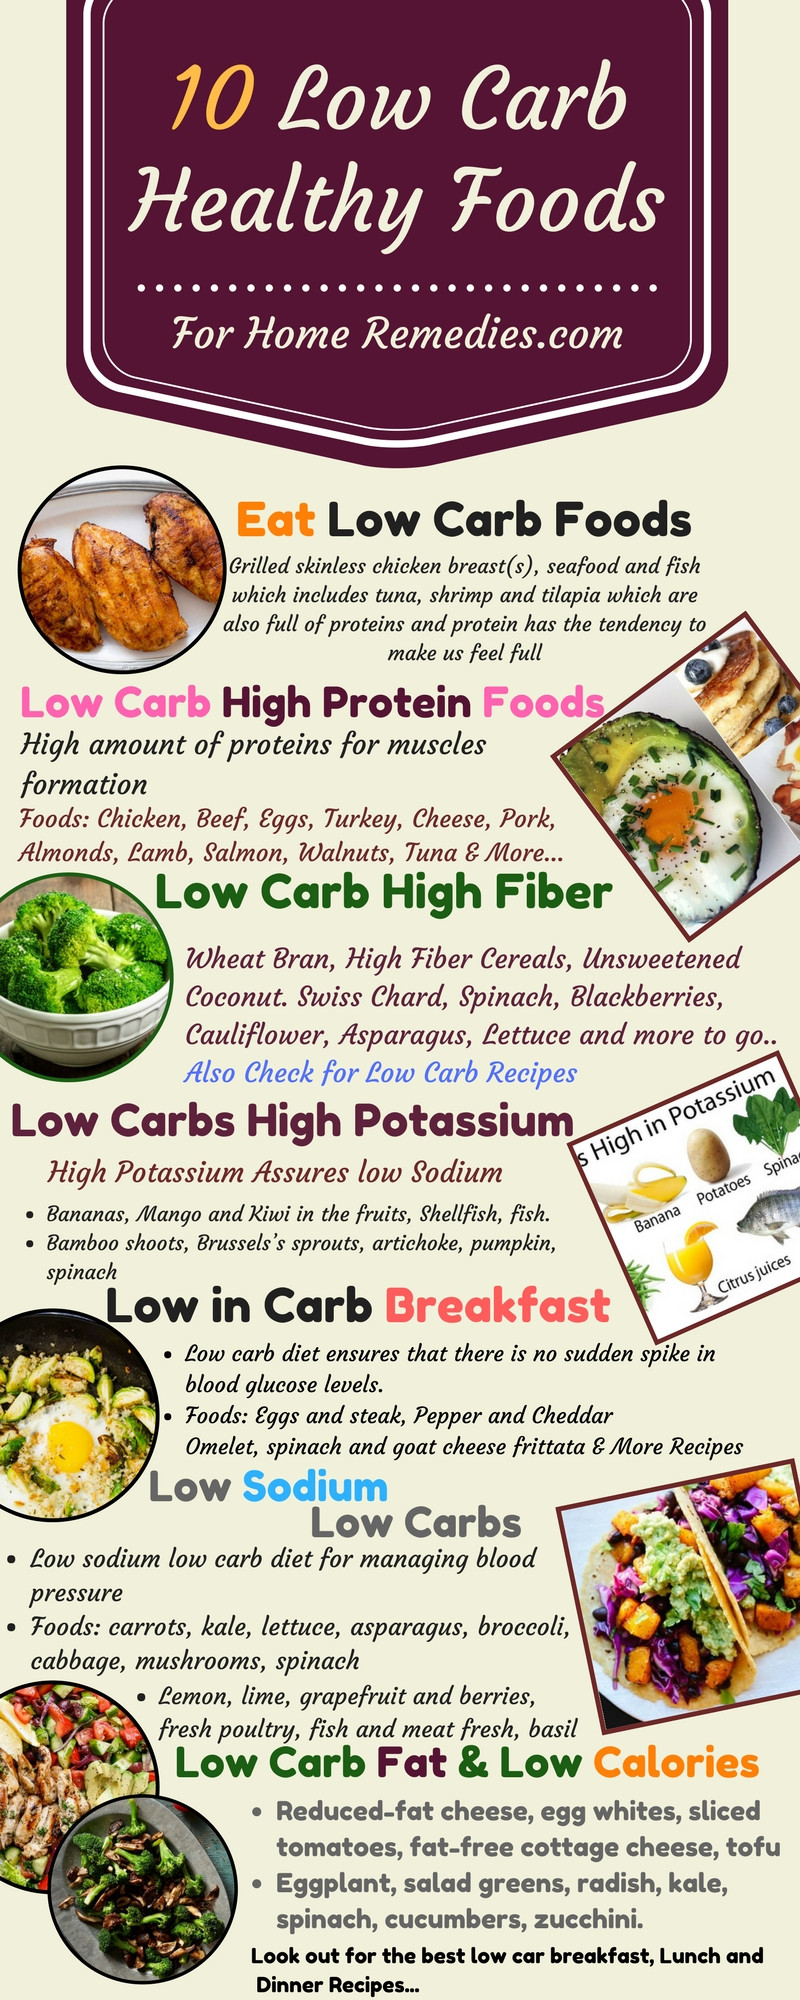 Low Cholesterol Low Carb Diet
 10 Low Carb Foods Low Fat Sugar High Protein Fiber